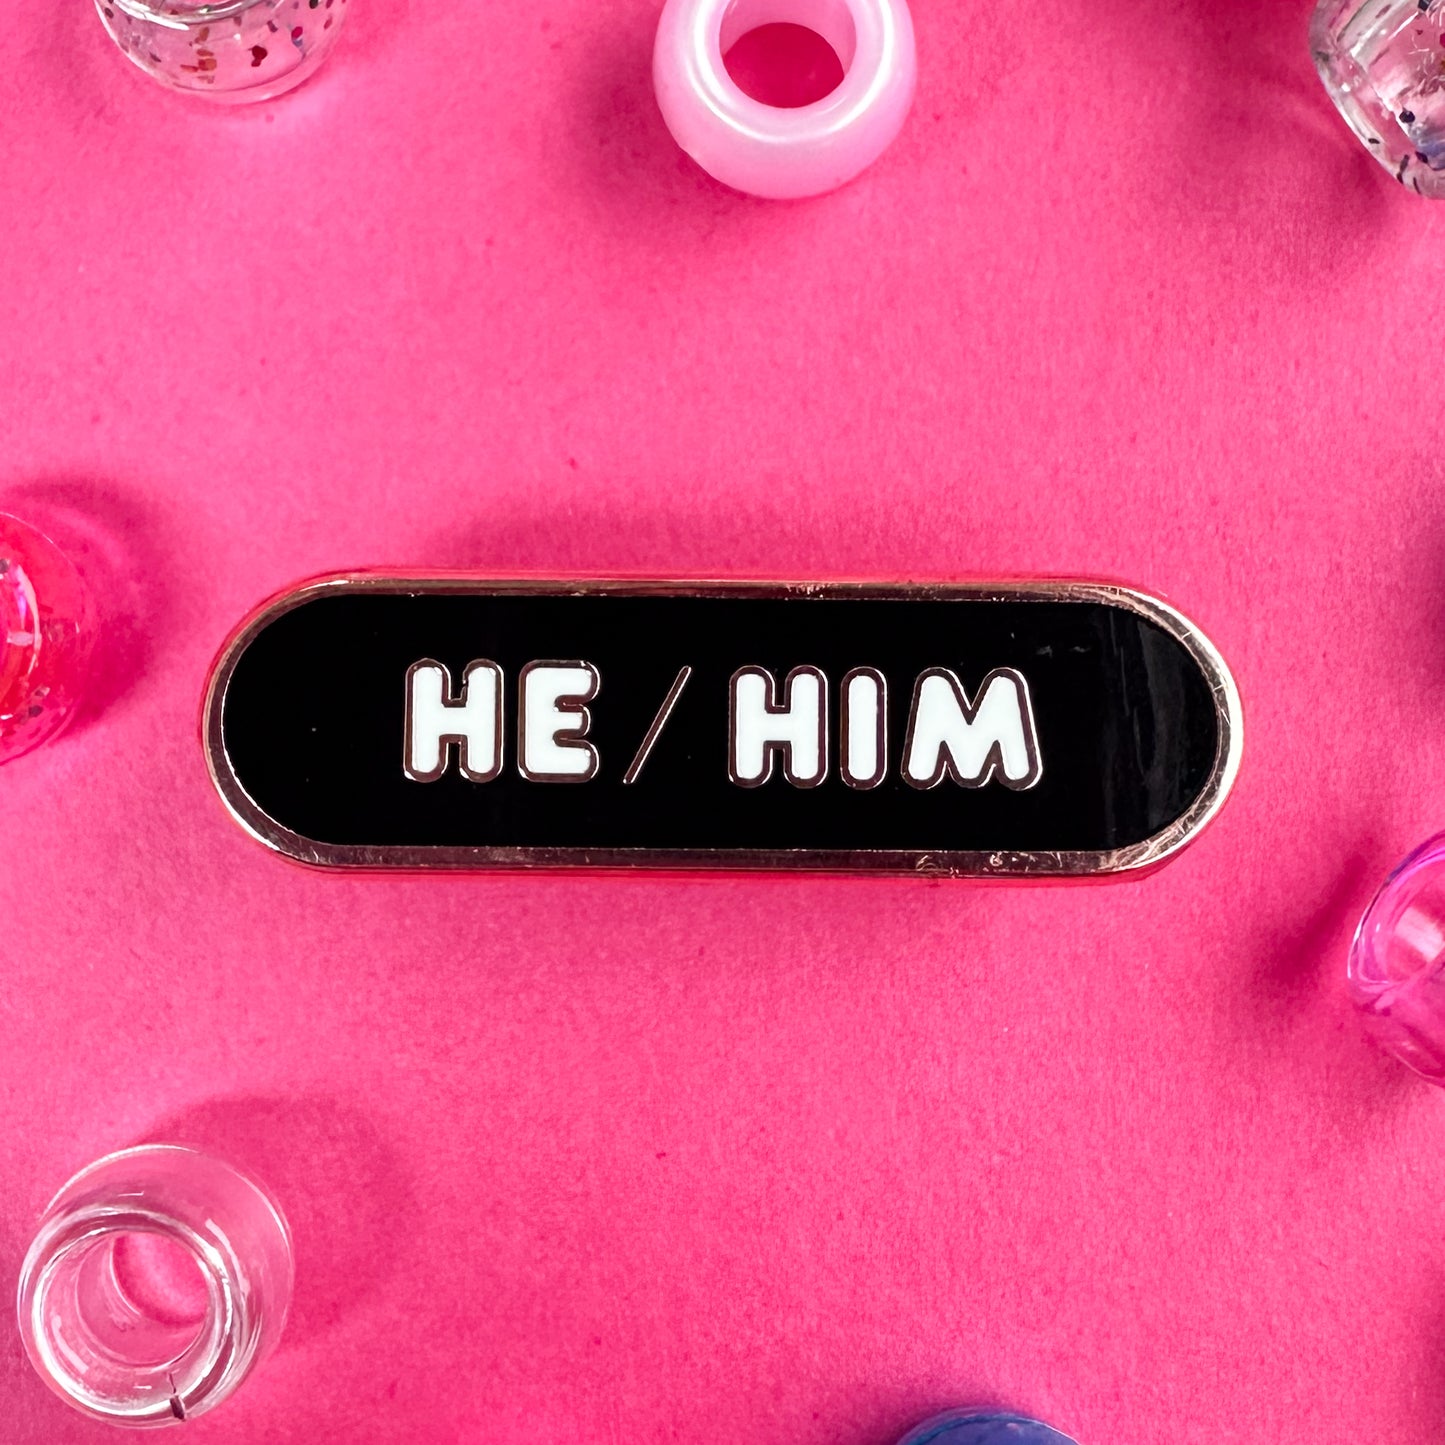 A black capsule pin with white bubble letters that read "He/Him". The pin is on a hot pink background with pony beads around it. 